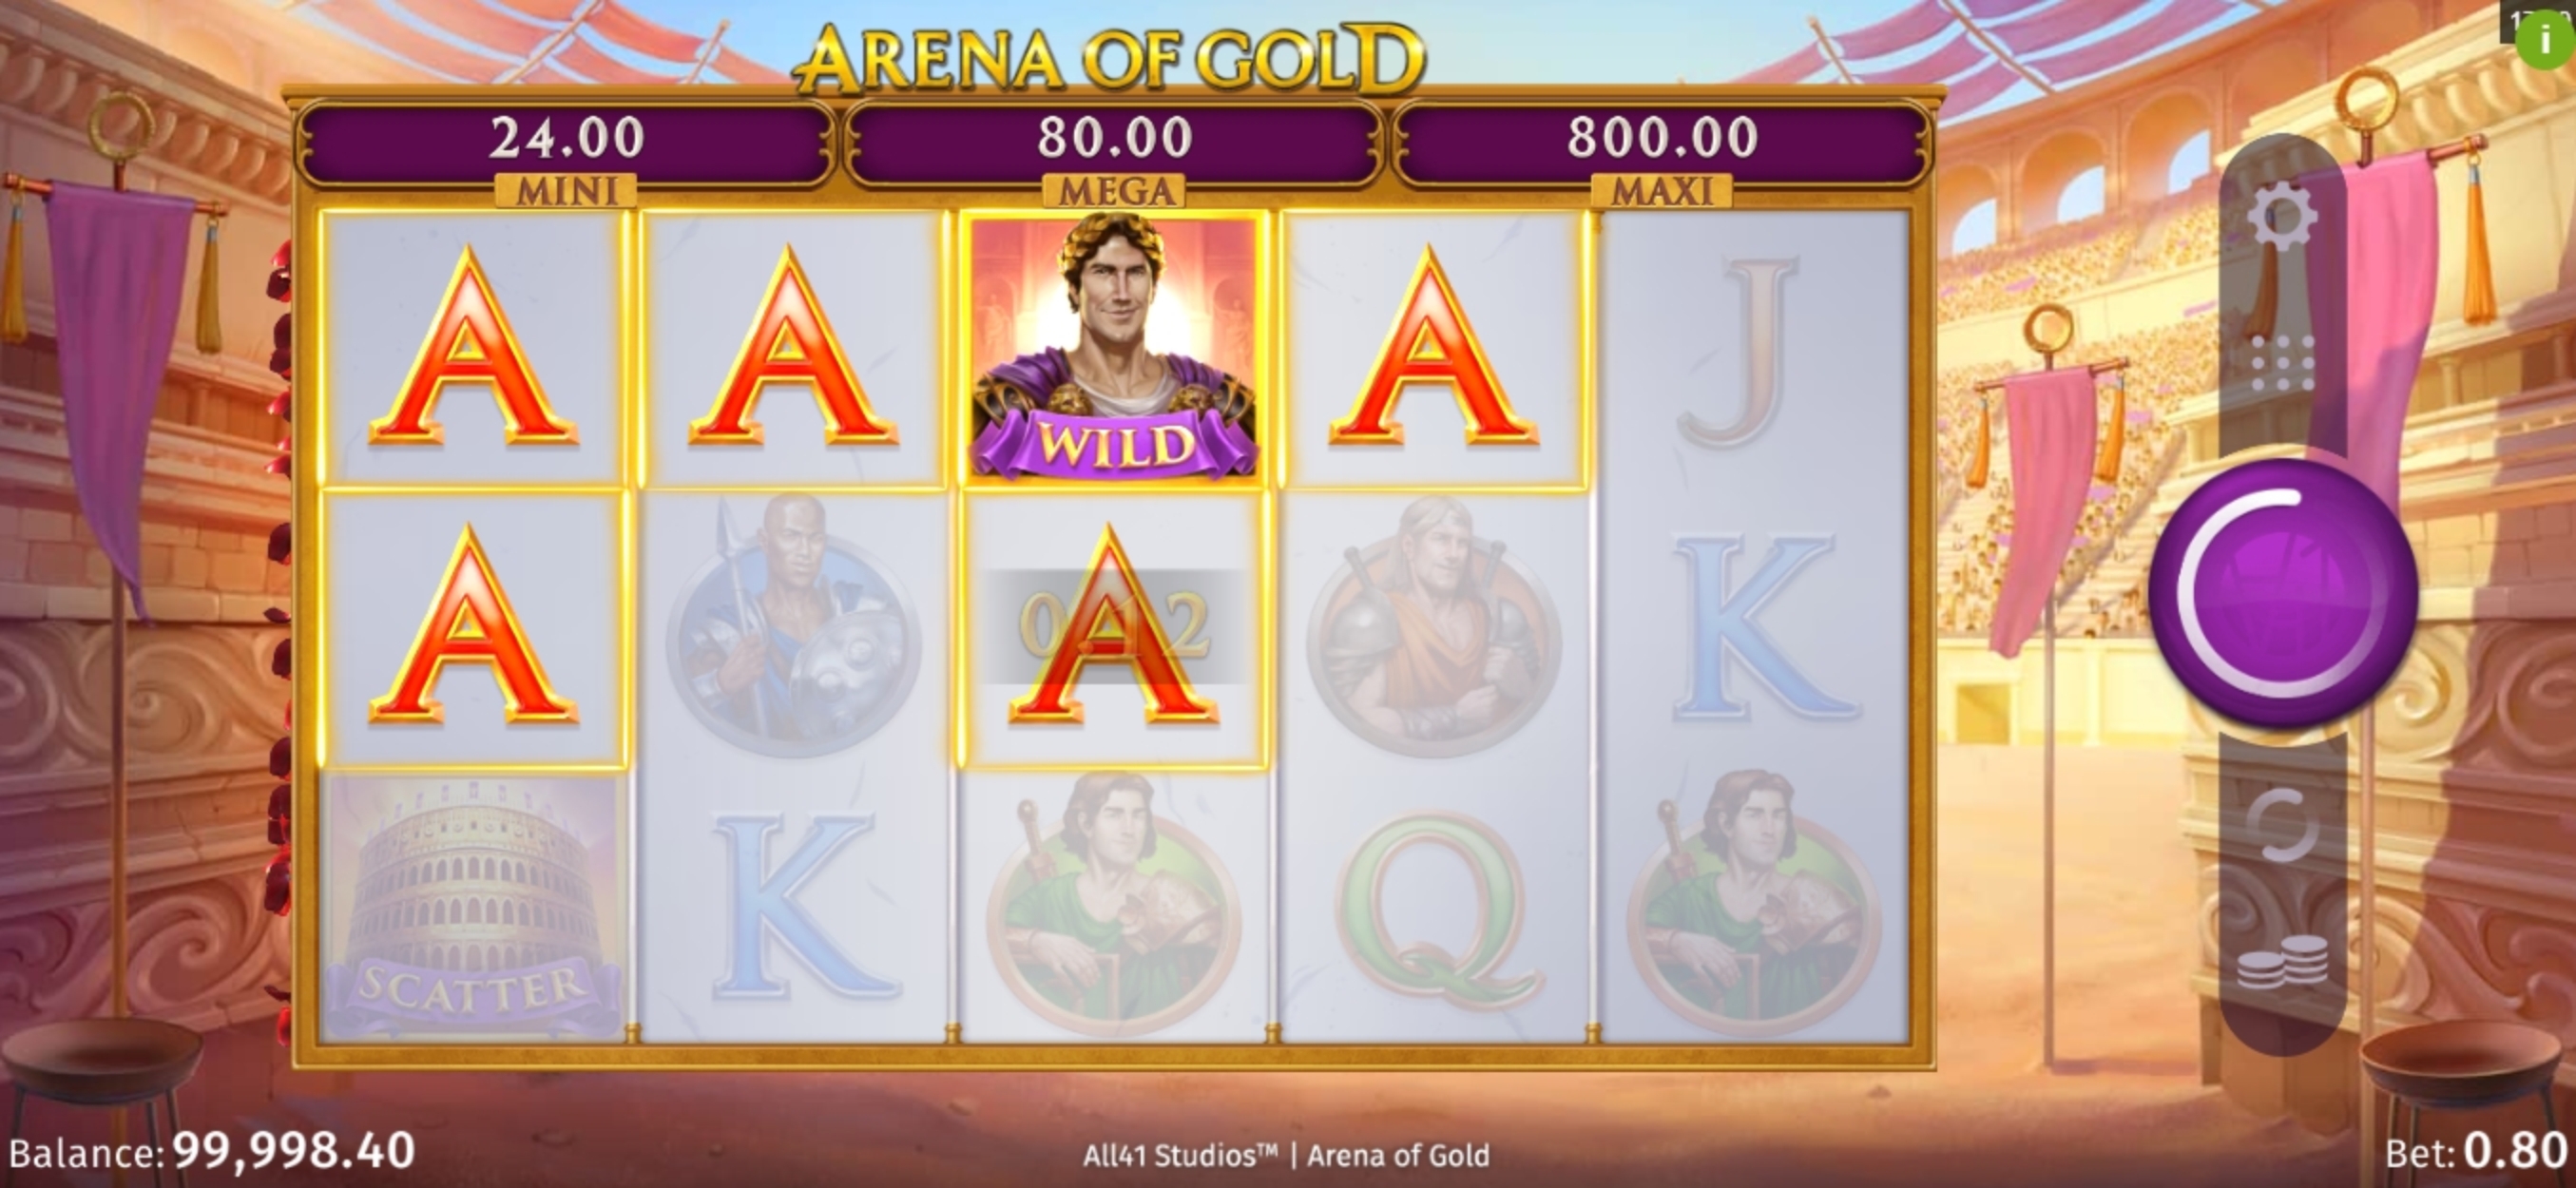 Win Money in Arena of Gold Free Slot Game by All41 Studios